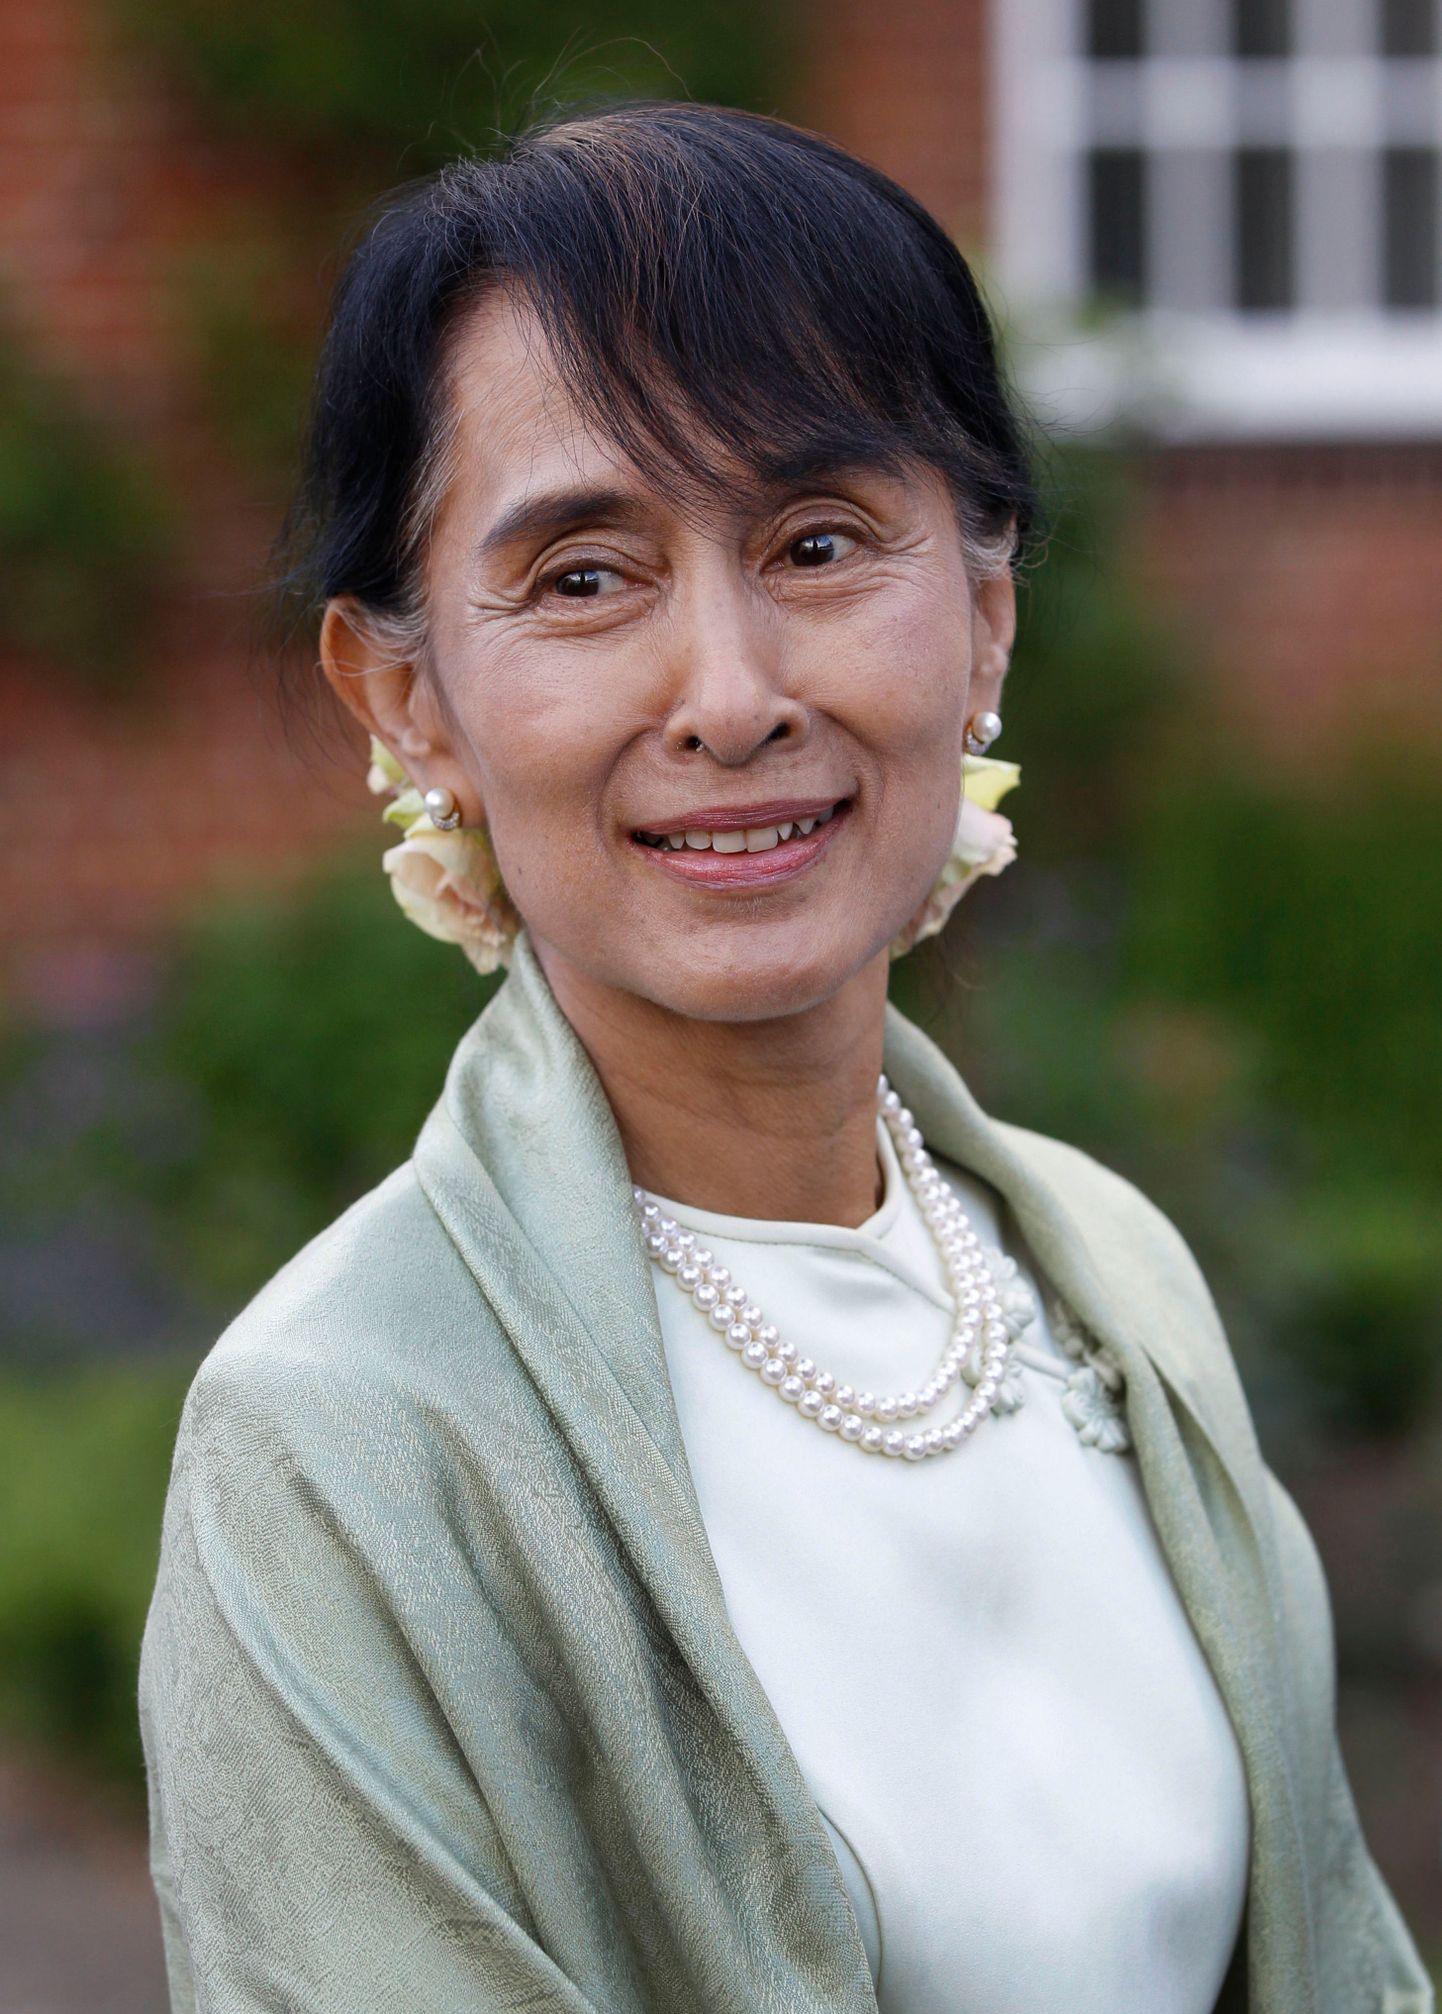 (FILES) This file photo taken on June 19, 2012 shows Myanmar leader Aung San Suu Kyi attending a reception at St Hugh's College in Oxford, northwest of London.
Myanmar leader Aung San Suu Kyi has been stripped of the honorific freedom of Oxford, the British city where she studied and raised her children, over her "inaction" in the Rohingya crisis. "When Aung San Suu Kyi was given the Freedom of the City in 1997 it was because she reflected Oxford's values ??of tolerance and internationalism," the city council said in a statement issued late on November 27, 2017. / AFP PHOTO / POOL / LEFTERIS PITARAKIS